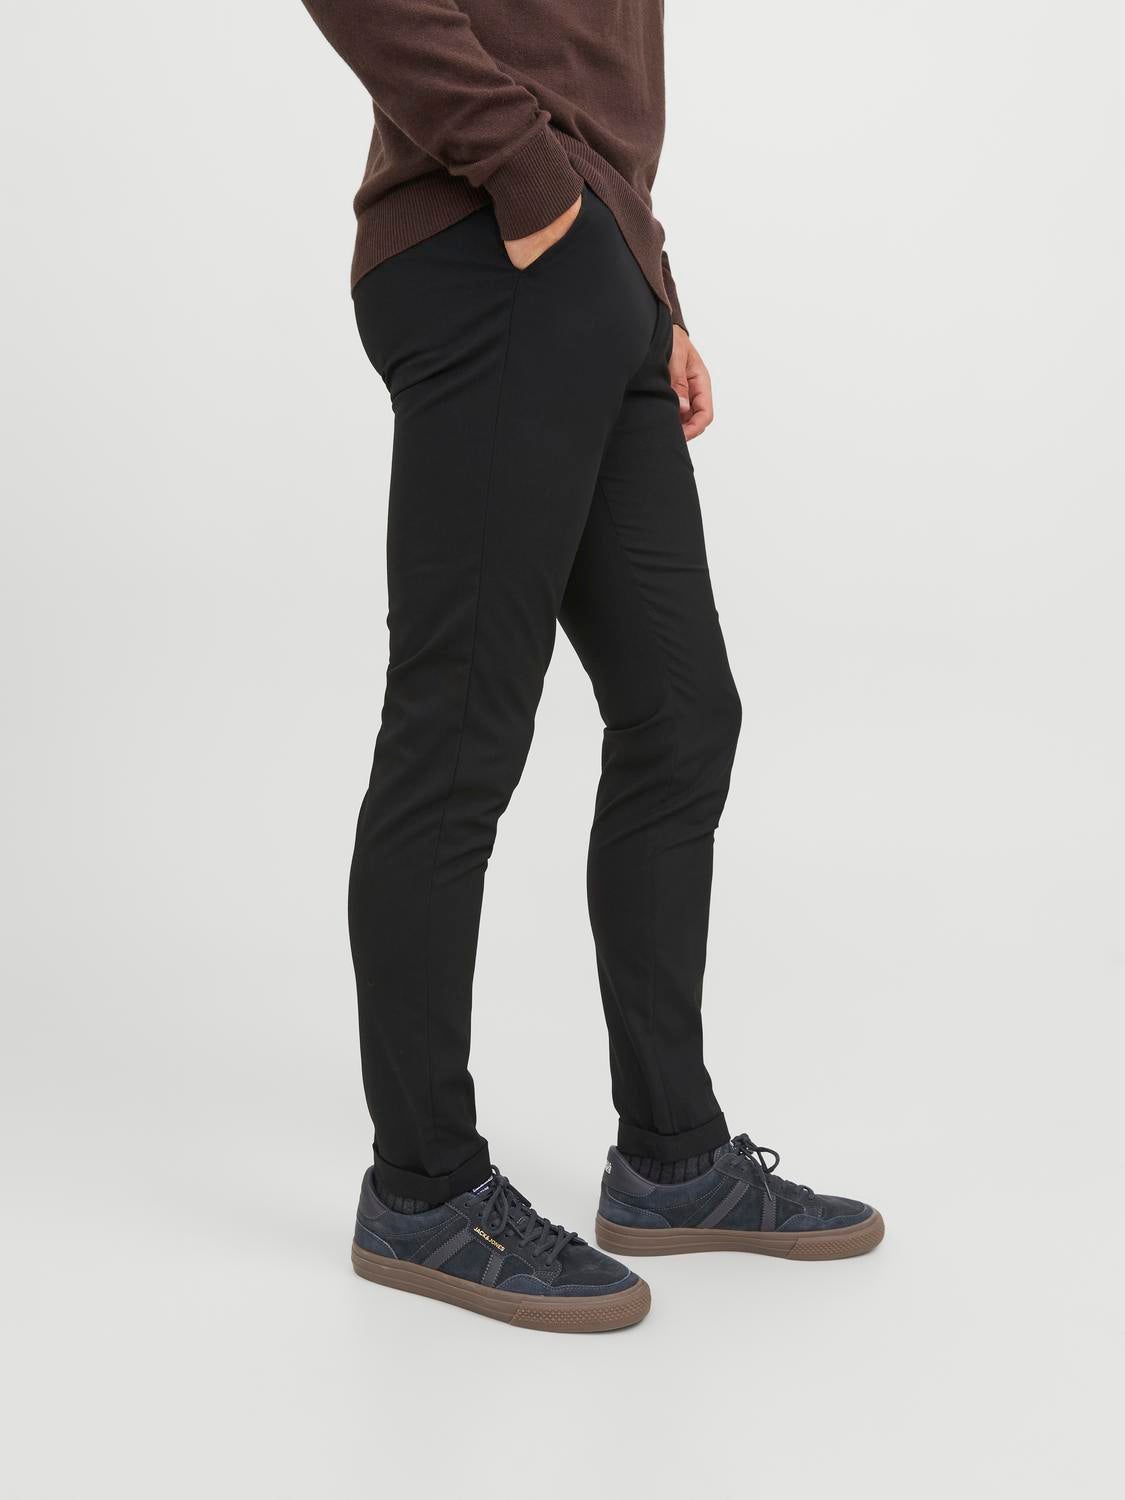 Buy Navy Skinny Fit Chino Trousers 42L | Trousers | Argos